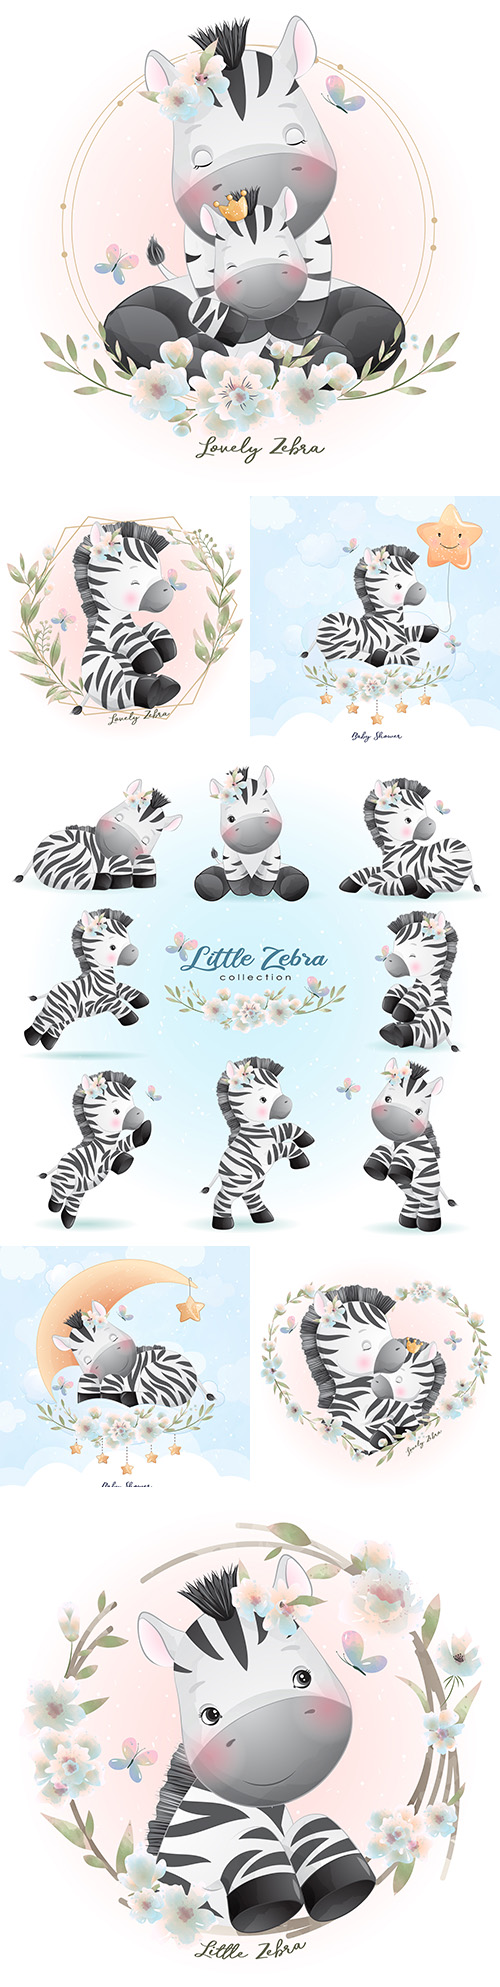 Pretty zebra painted with flowers illustrations
